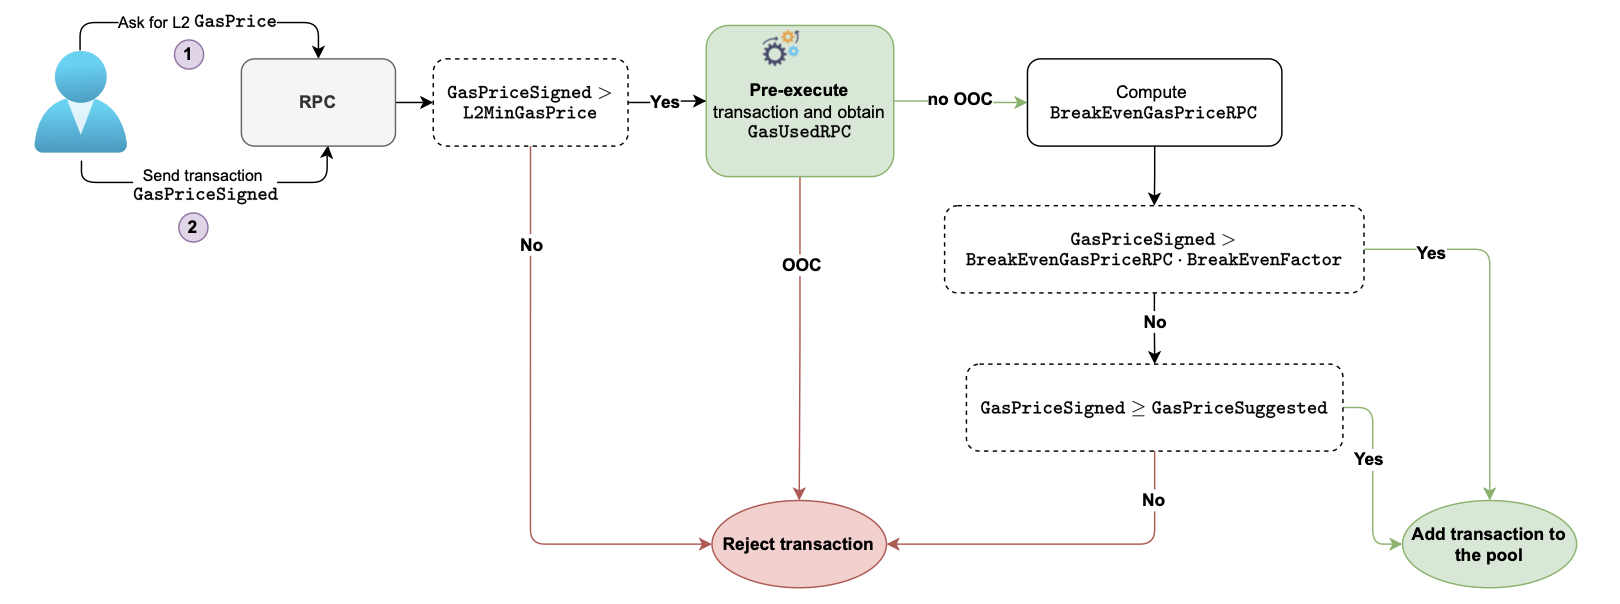 Figure: Transaction flow within the RPC